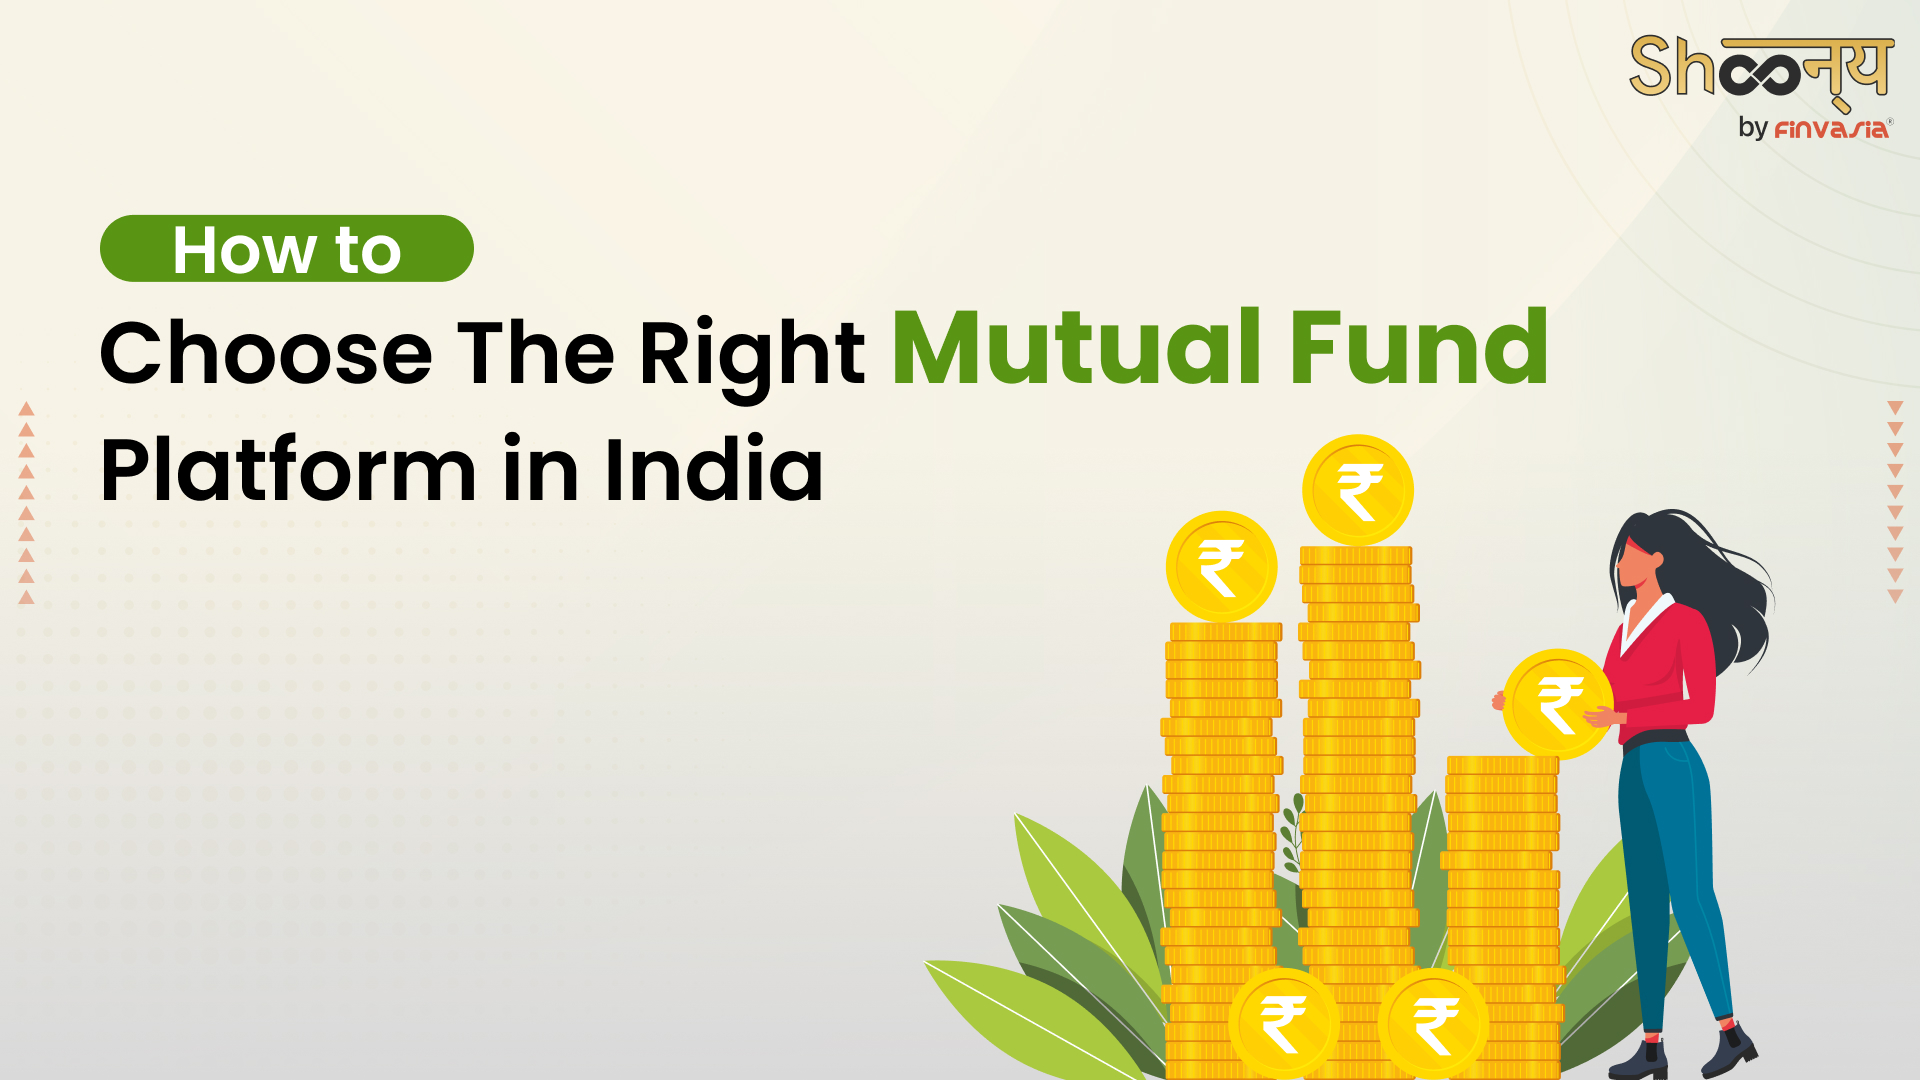 Discover the Best Mutual Fund Investment Platform